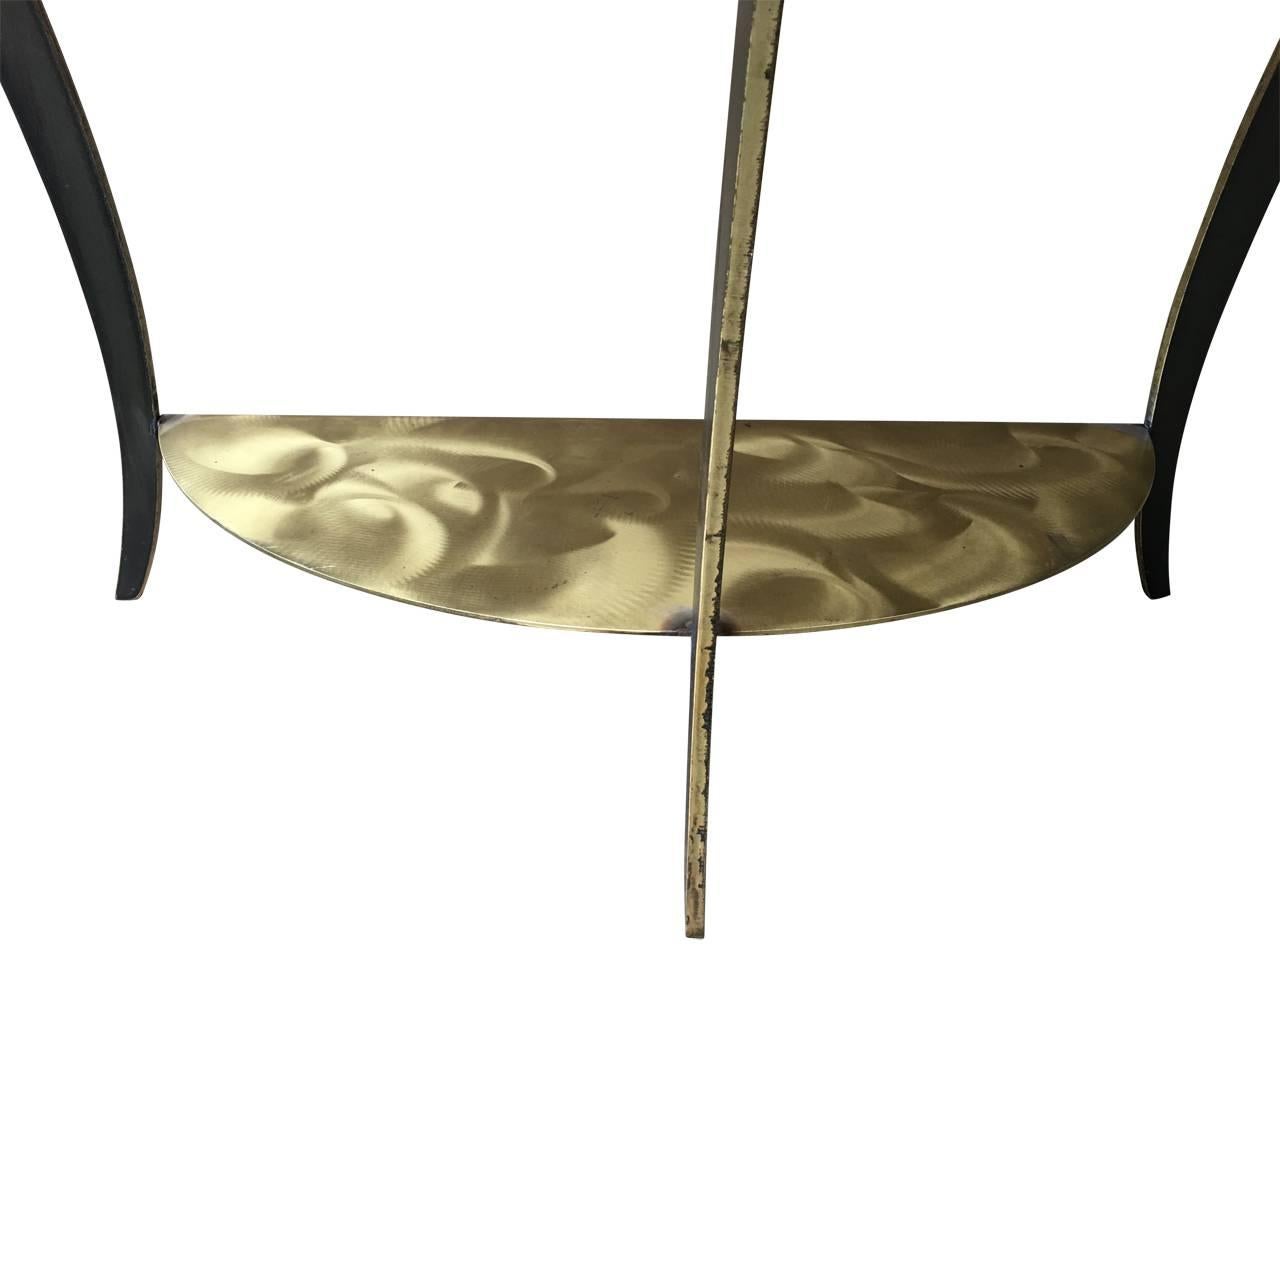 Two-Tier Brushed Brass And Steel Demilune Console In Good Condition For Sale In Haddonfield, NJ